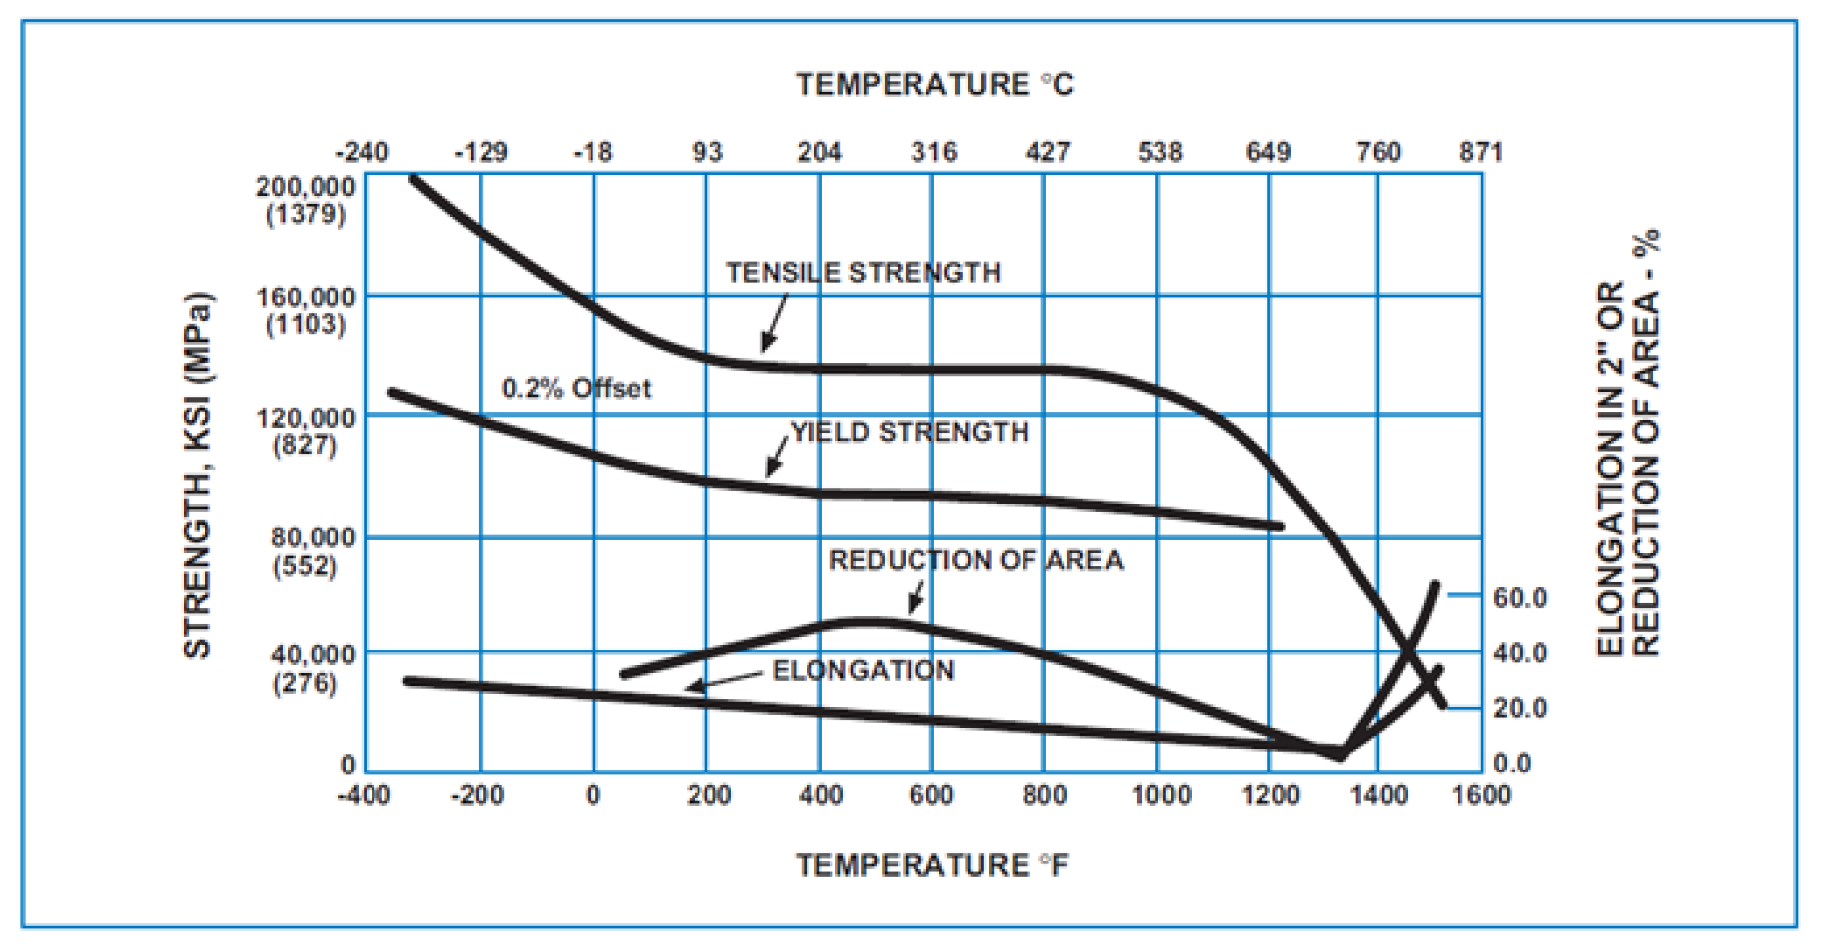 A286 Typical Short Time Tensile Properties as a Function of Temperature